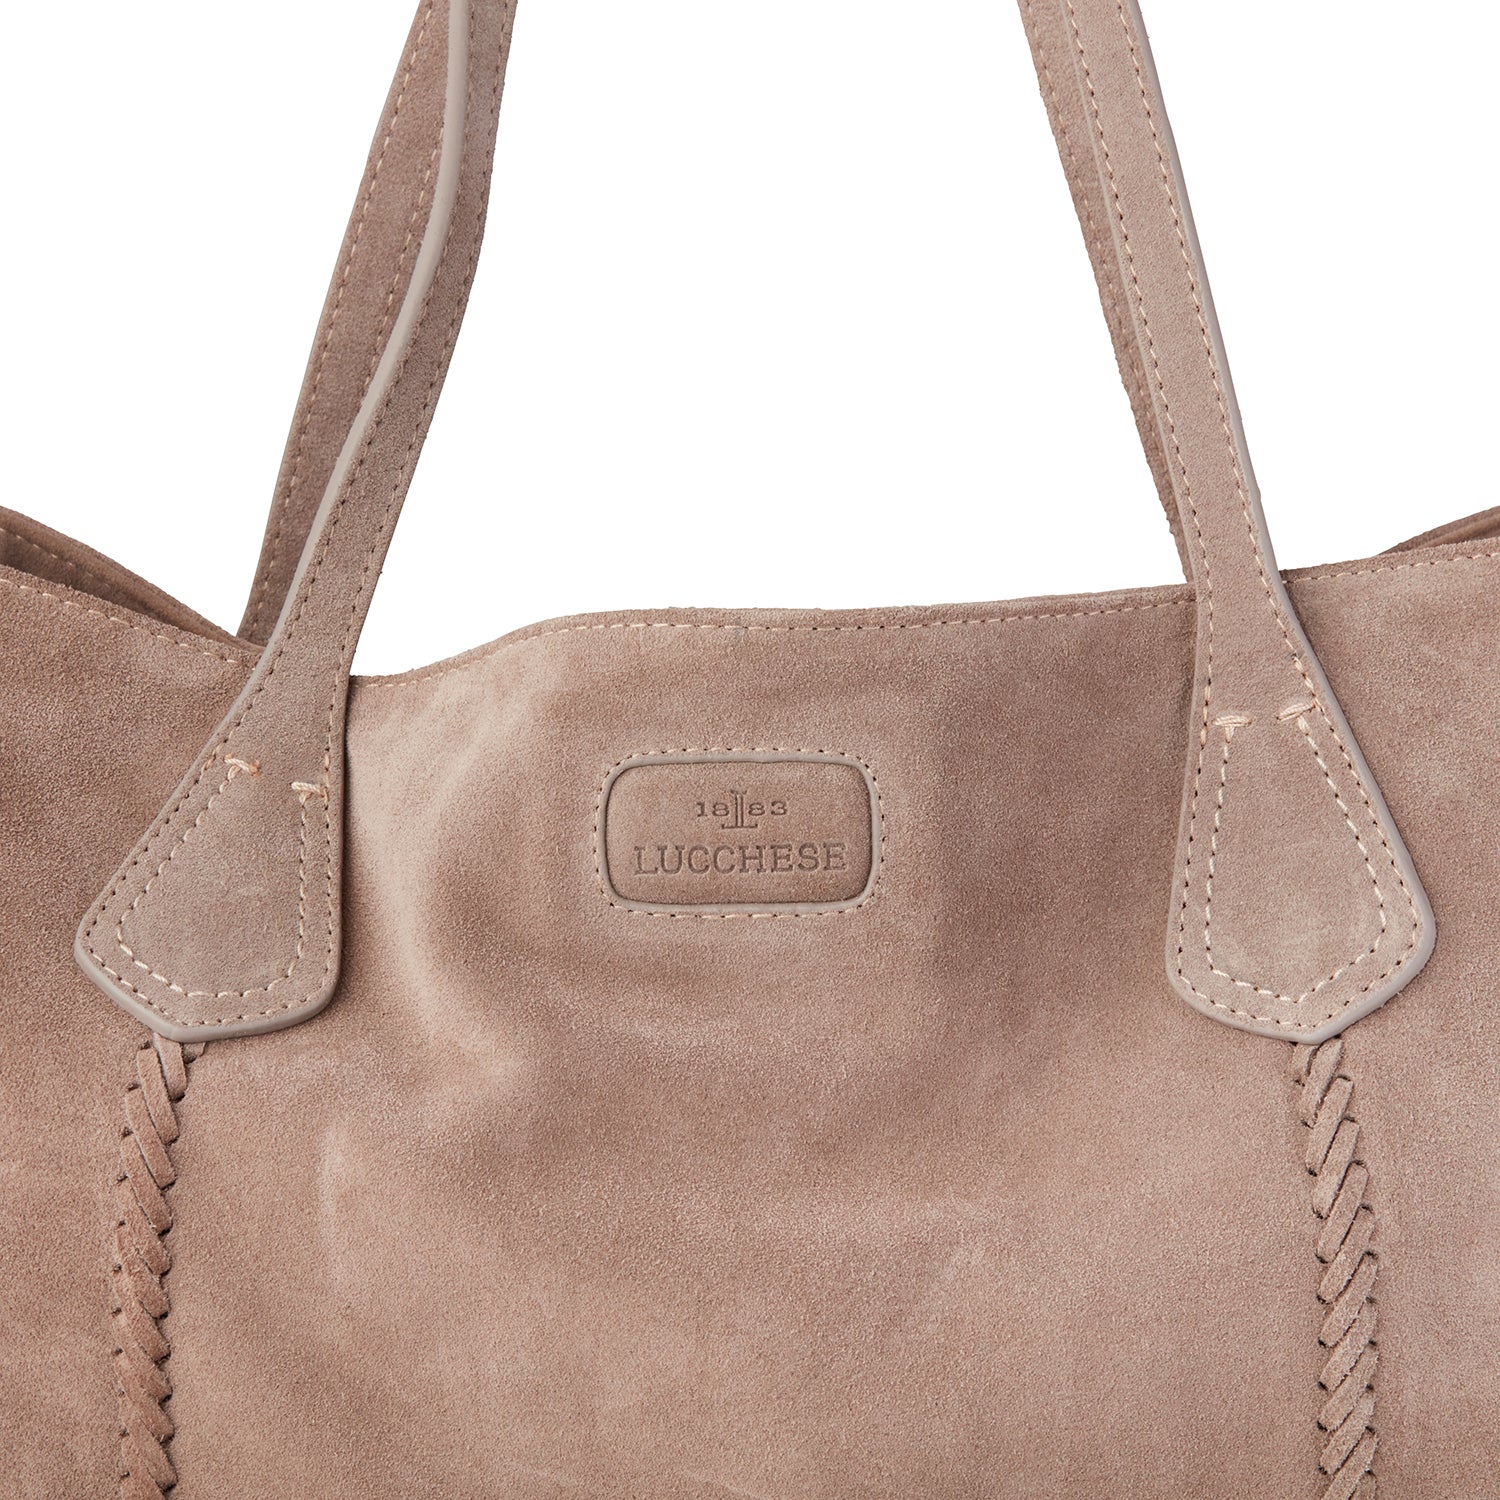 SUEDE TOTE BAG - taupe brown